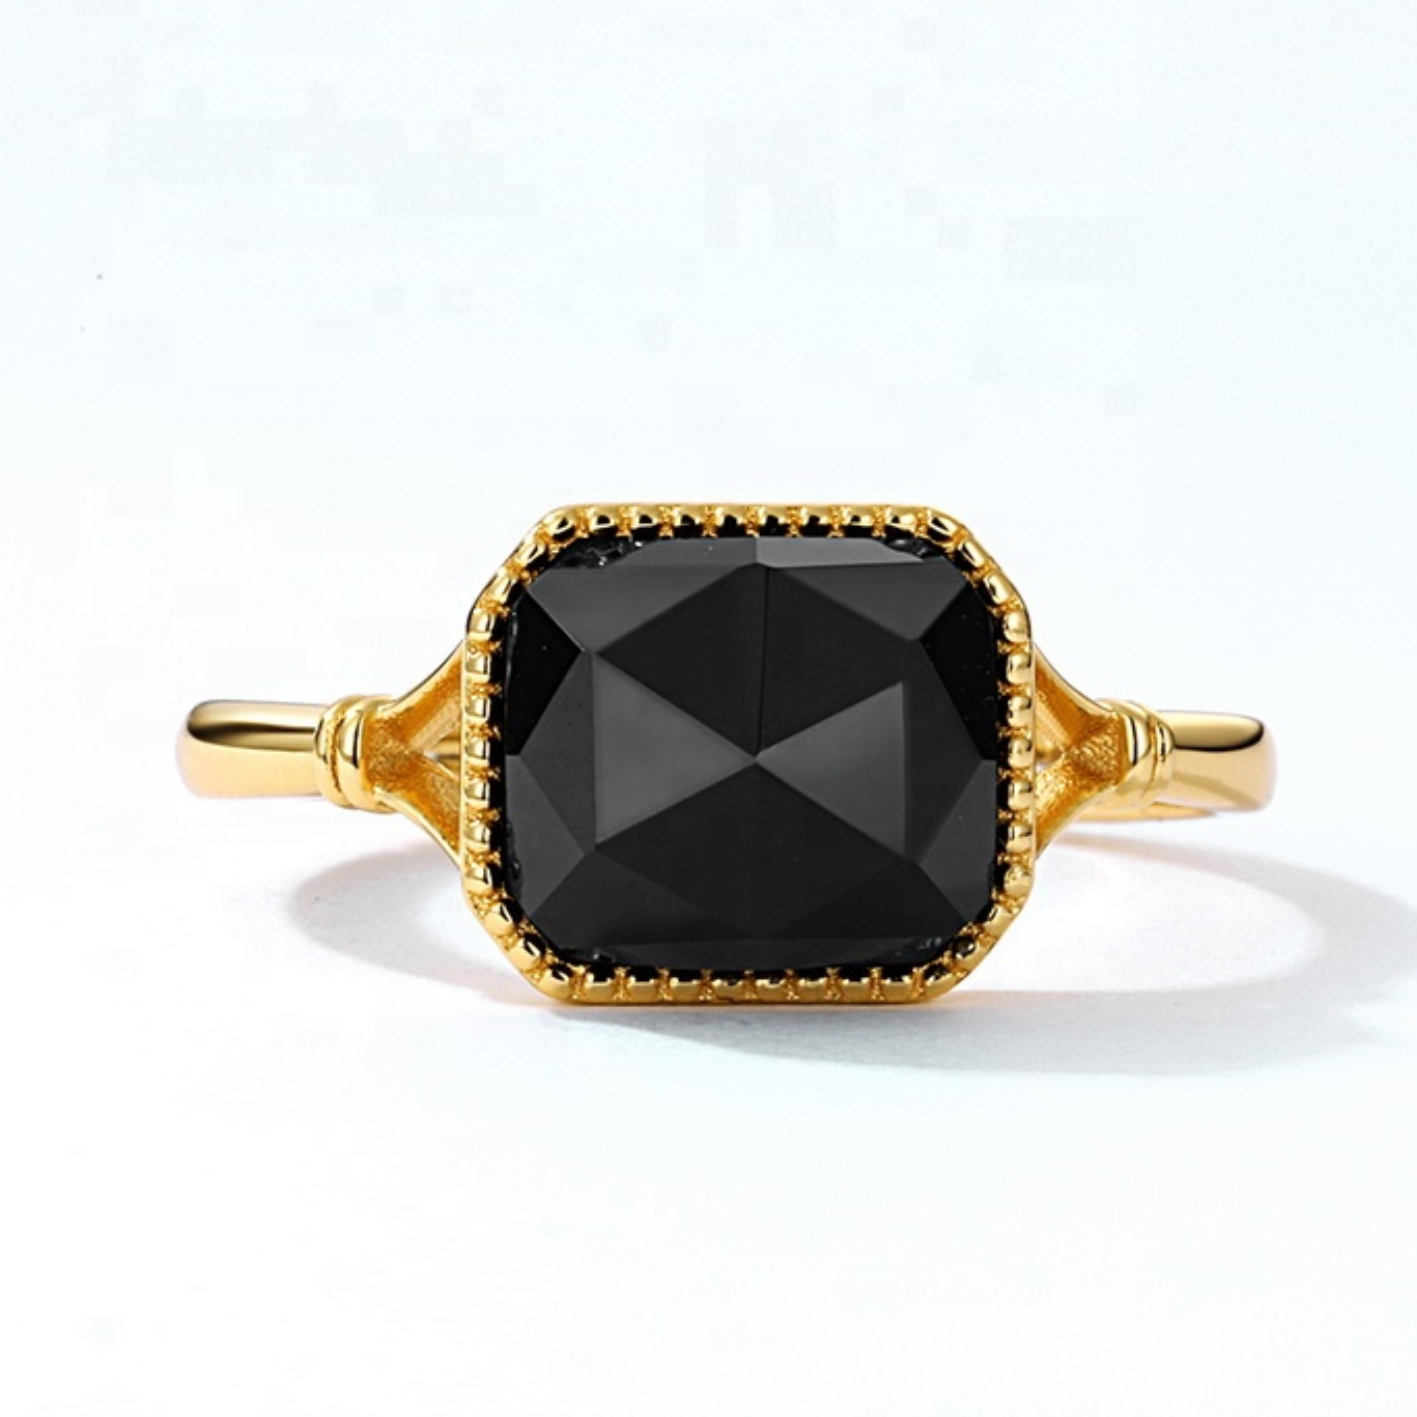 Black and Gold Agate Square Stone Ring